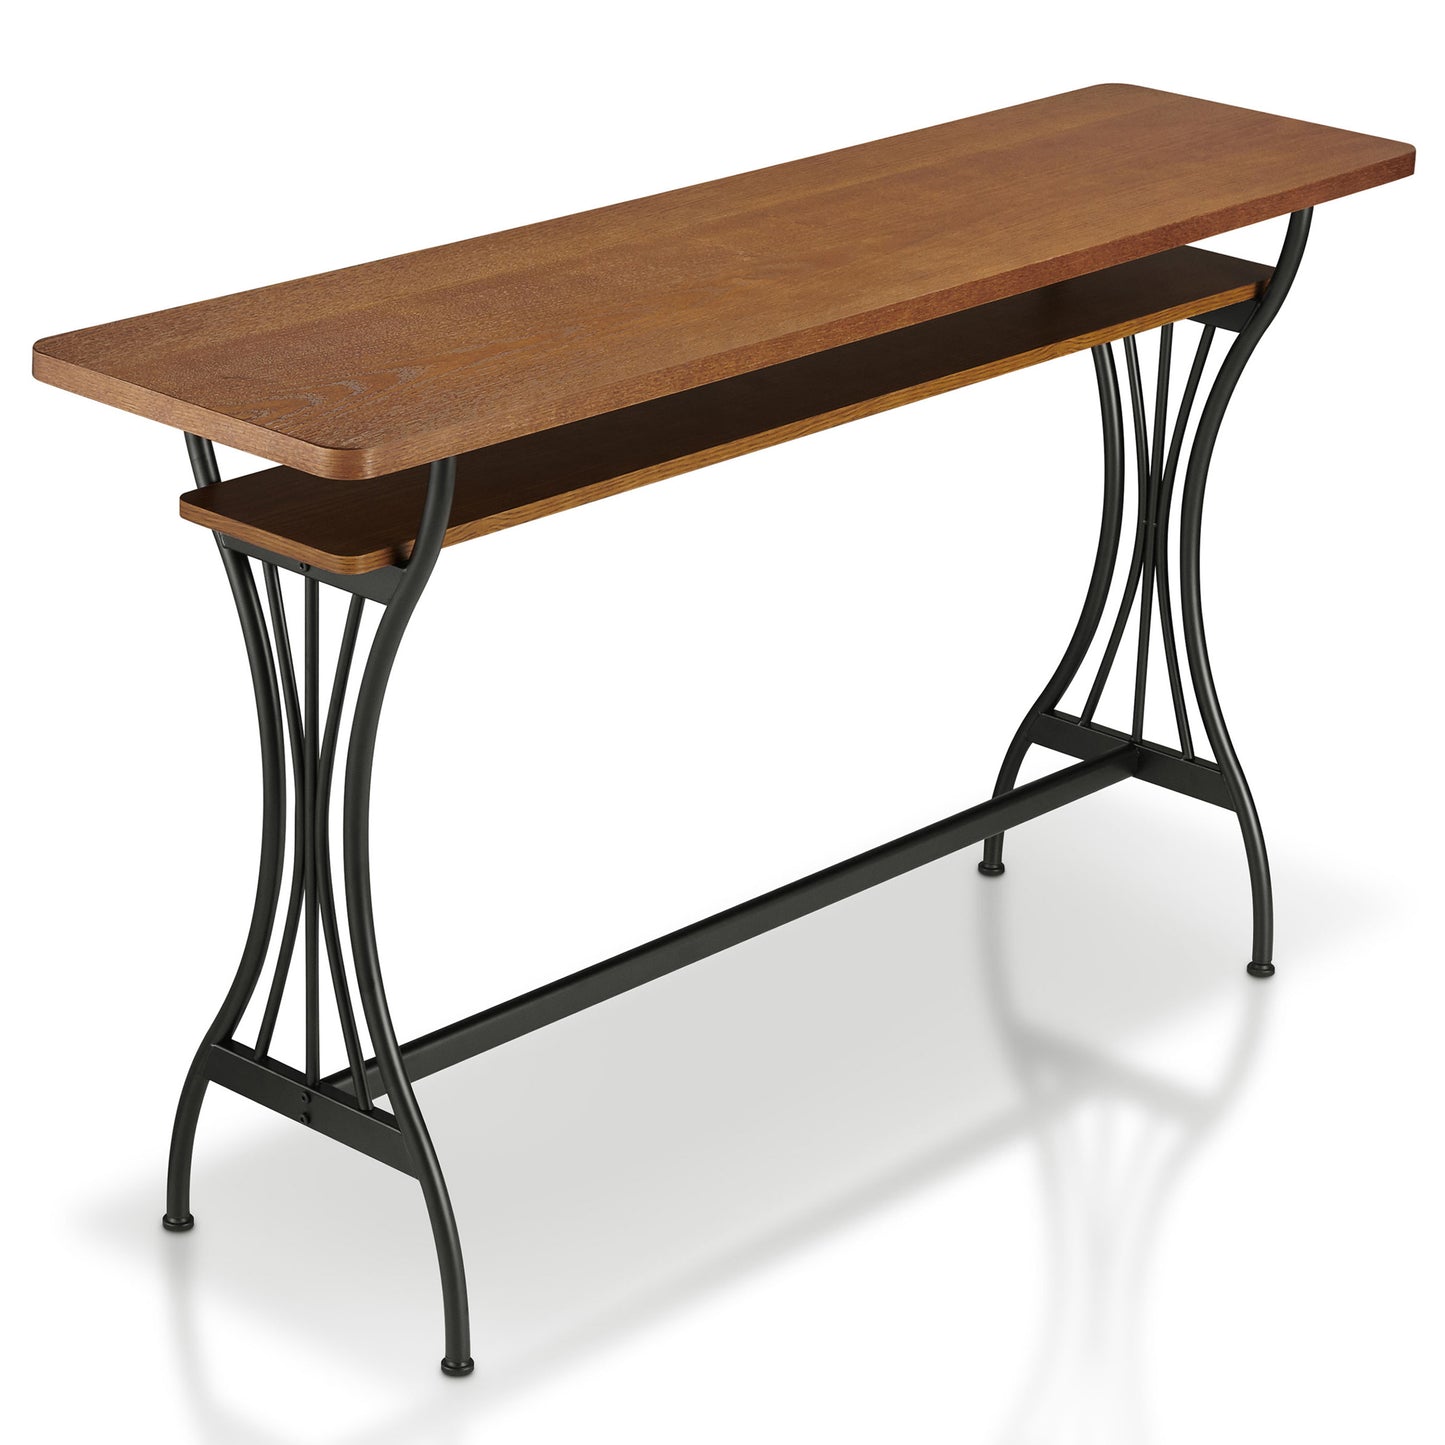 Right angled upper view of a modern industrial warm oak and black one-shelf counter height table on a white background